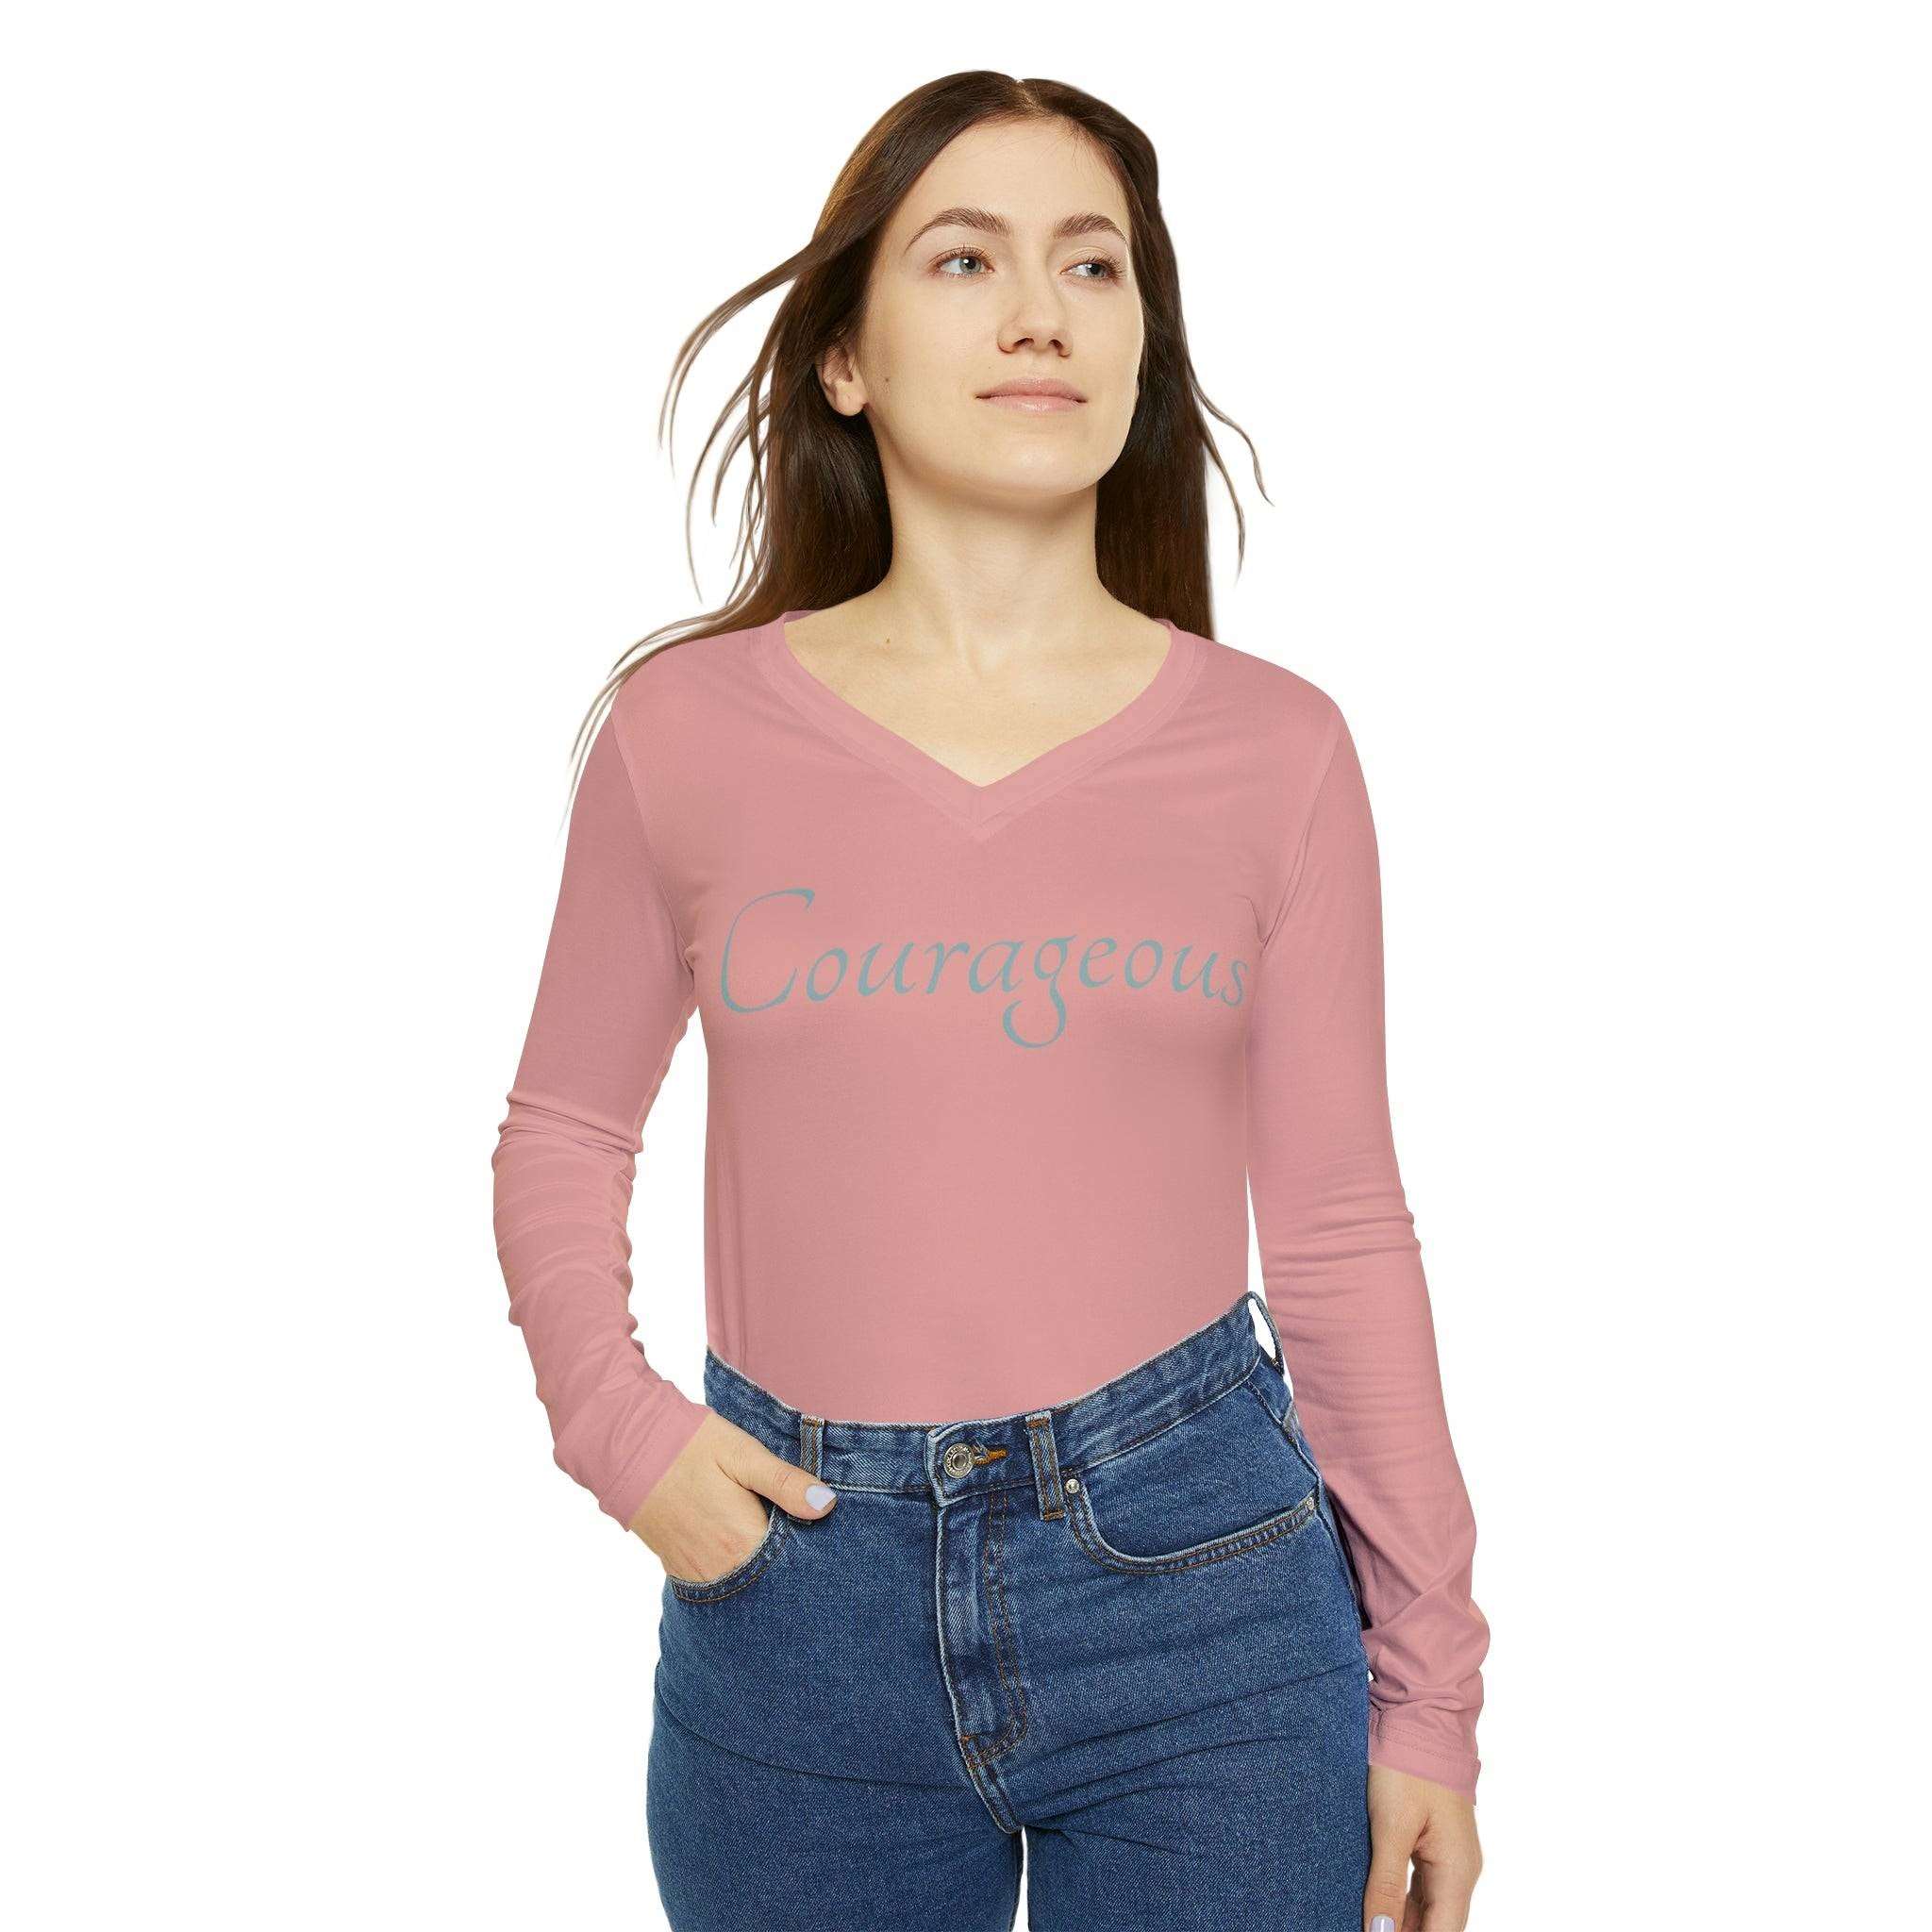 Courageous Long Sleeve V-Neck: Start Conversations Casual Shirt Double Needle Stitching Everyday Wear Mental Health Donation Polyester Spandex Blend Statement Shirt Strong Shirt Tee for Women All Over Prints 7917821736459360250_2048_72b0a2b2-ffa3-47bf-9f87-bb5429a93c7b Printify